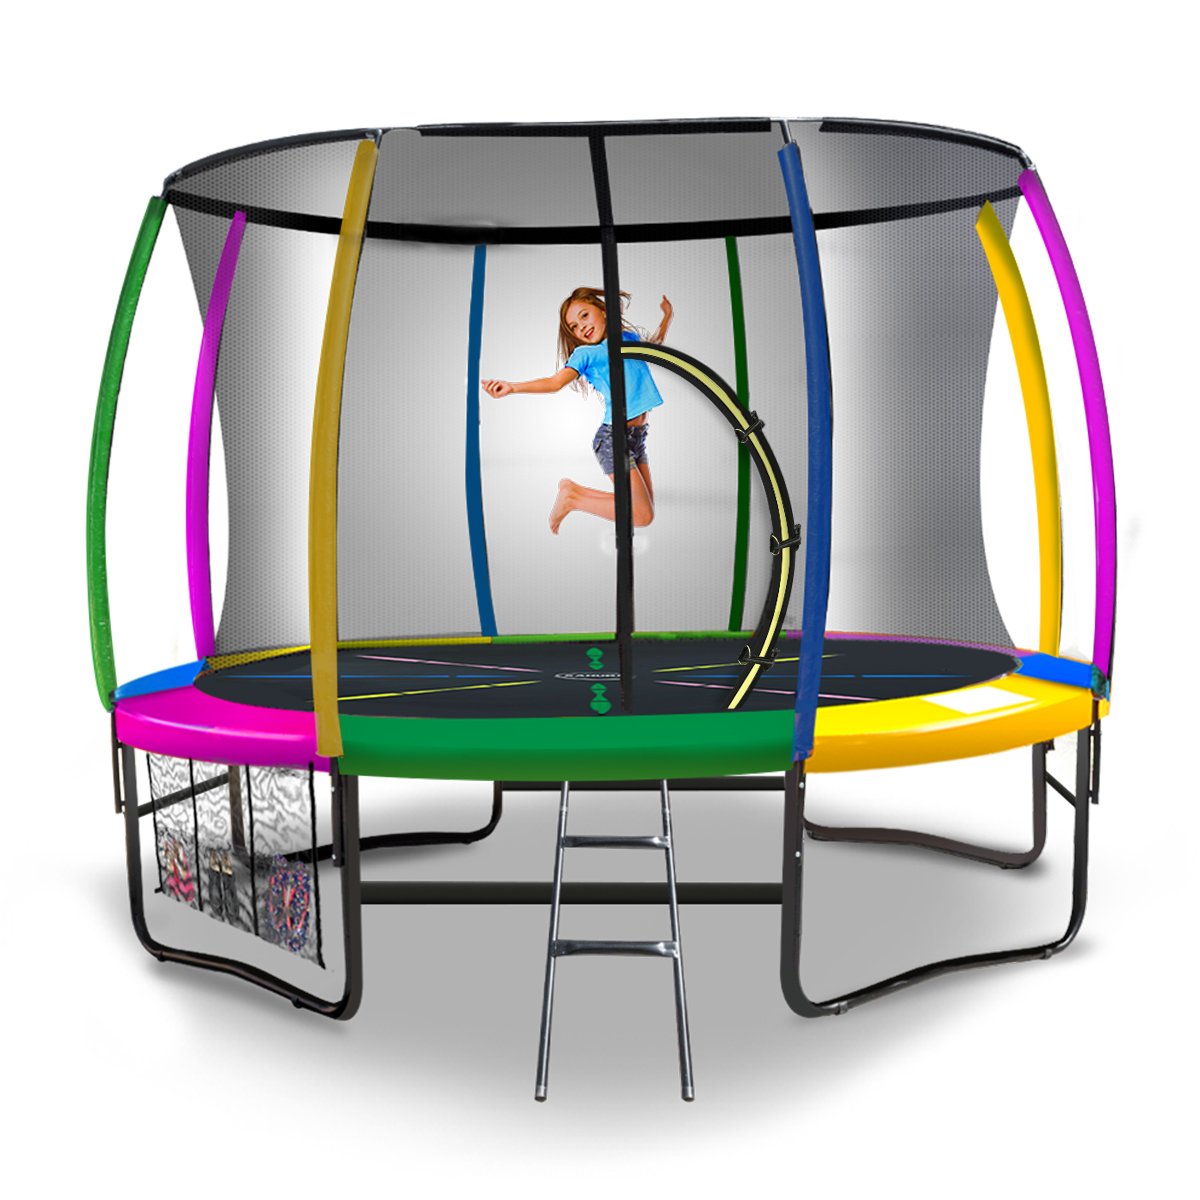 Kahuna 8ft Outdoor Rainbow Trampoline For Kids And Children Suited For Fitness Exercise Gymnastics With Safety Enclosure - SILBERSHELL